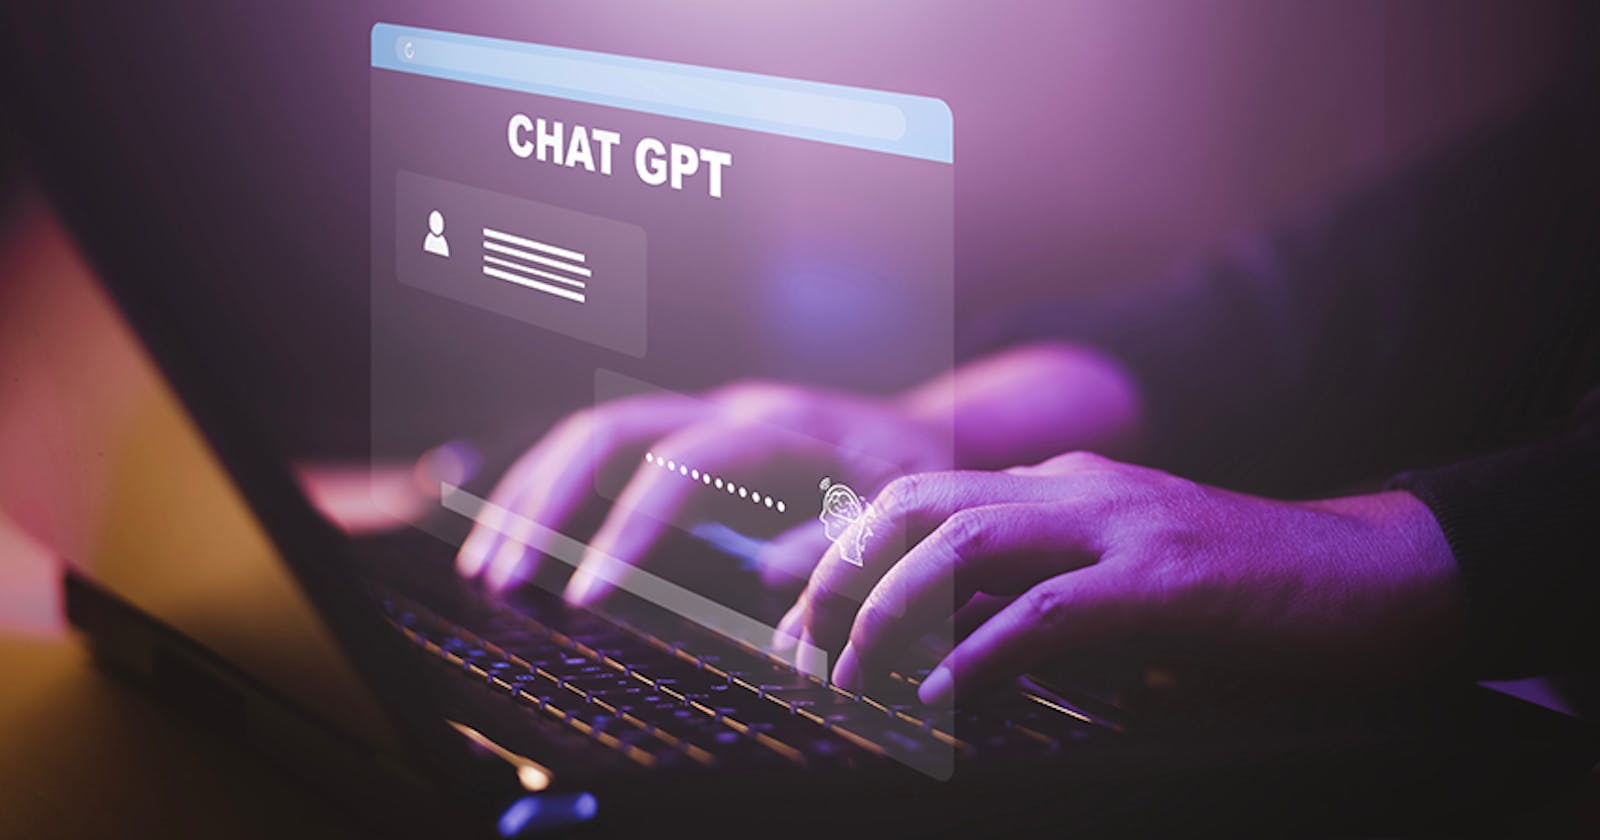 AI Agents like Chat GPT, should I be worried about them as a developer?